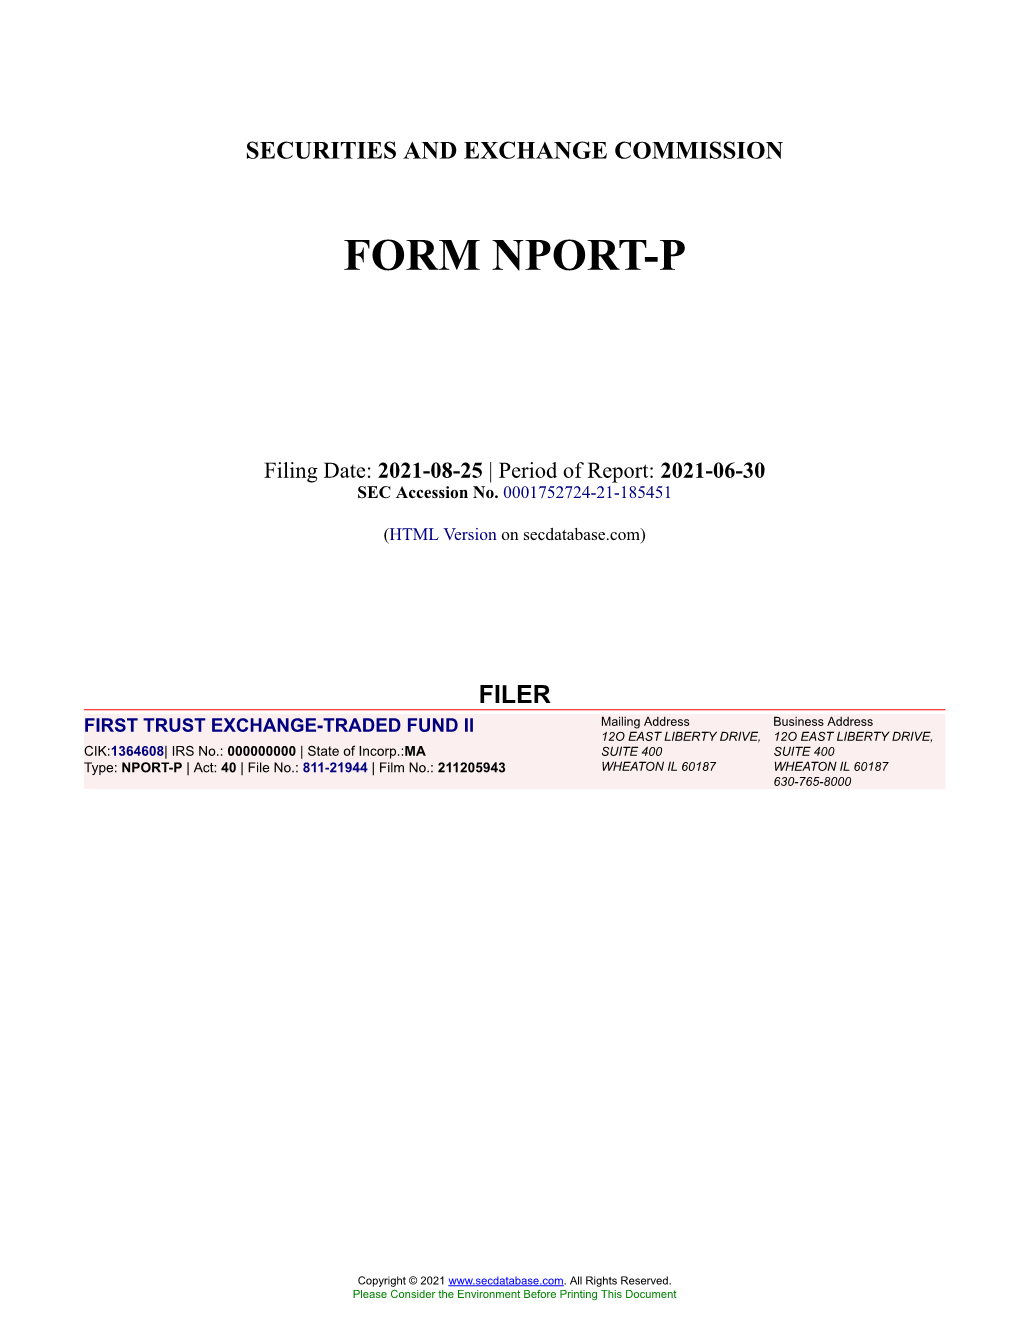 FIRST TRUST EXCHANGE-TRADED FUND II Form NPORT-P Filed 2021